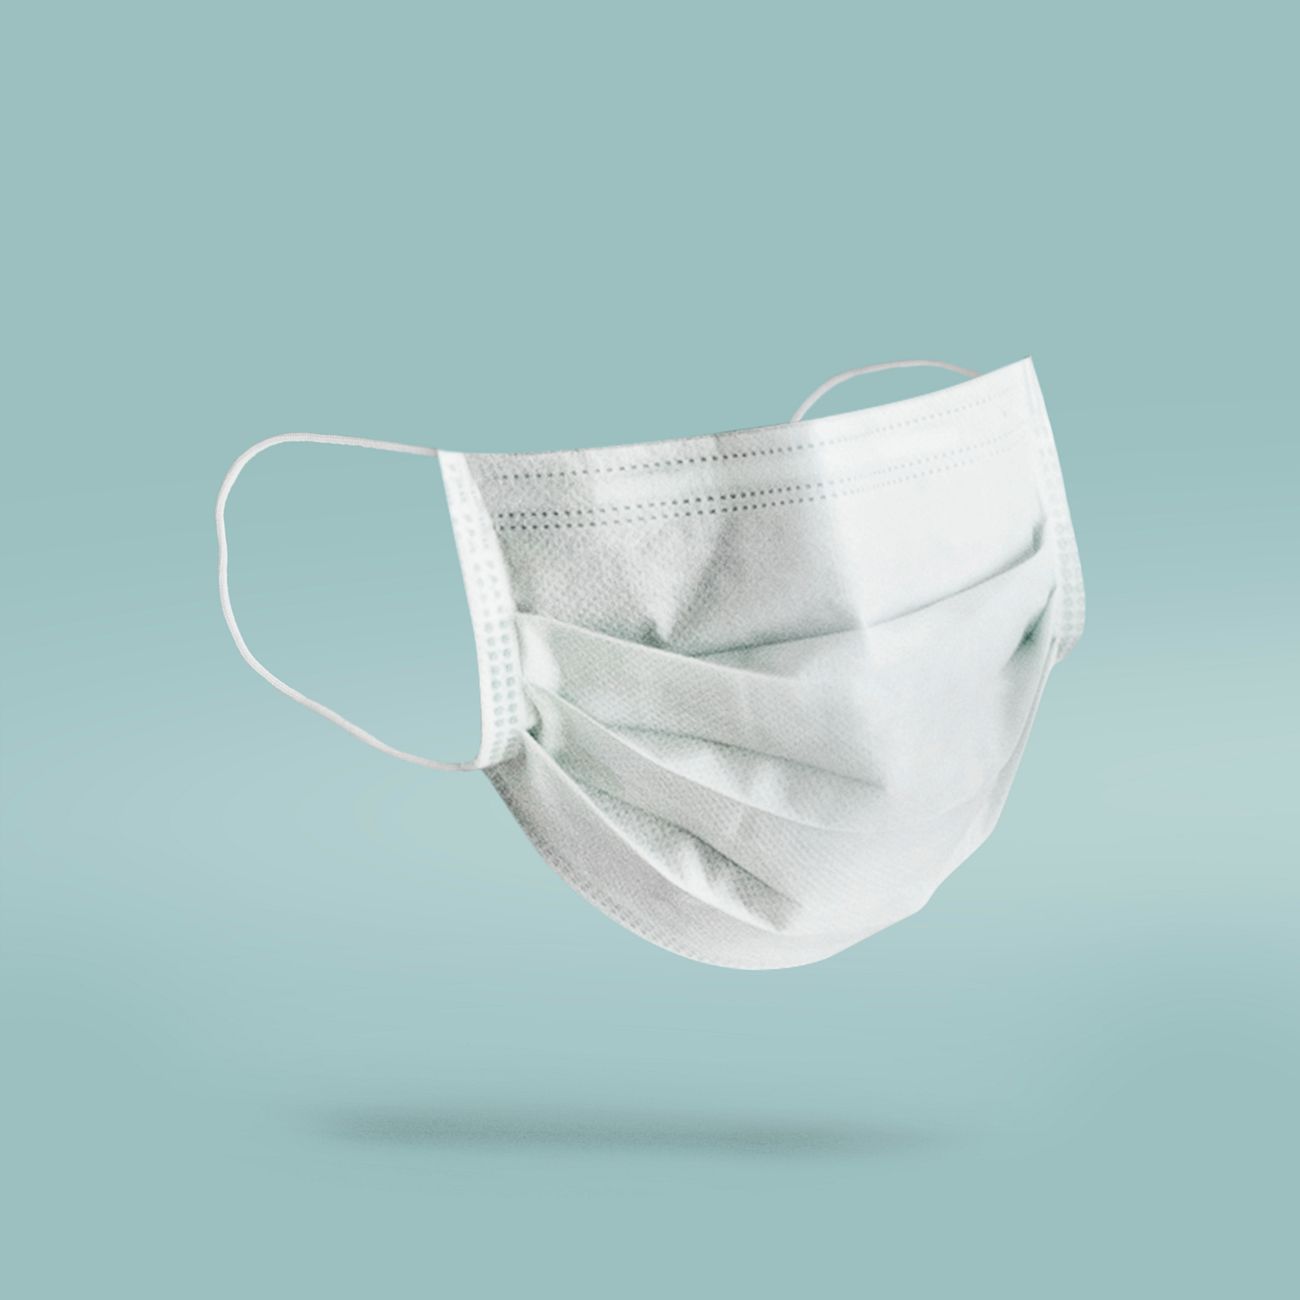 Download Surgical mask to prevent coronavirus infection mockup | Free psd mockup - 2297630